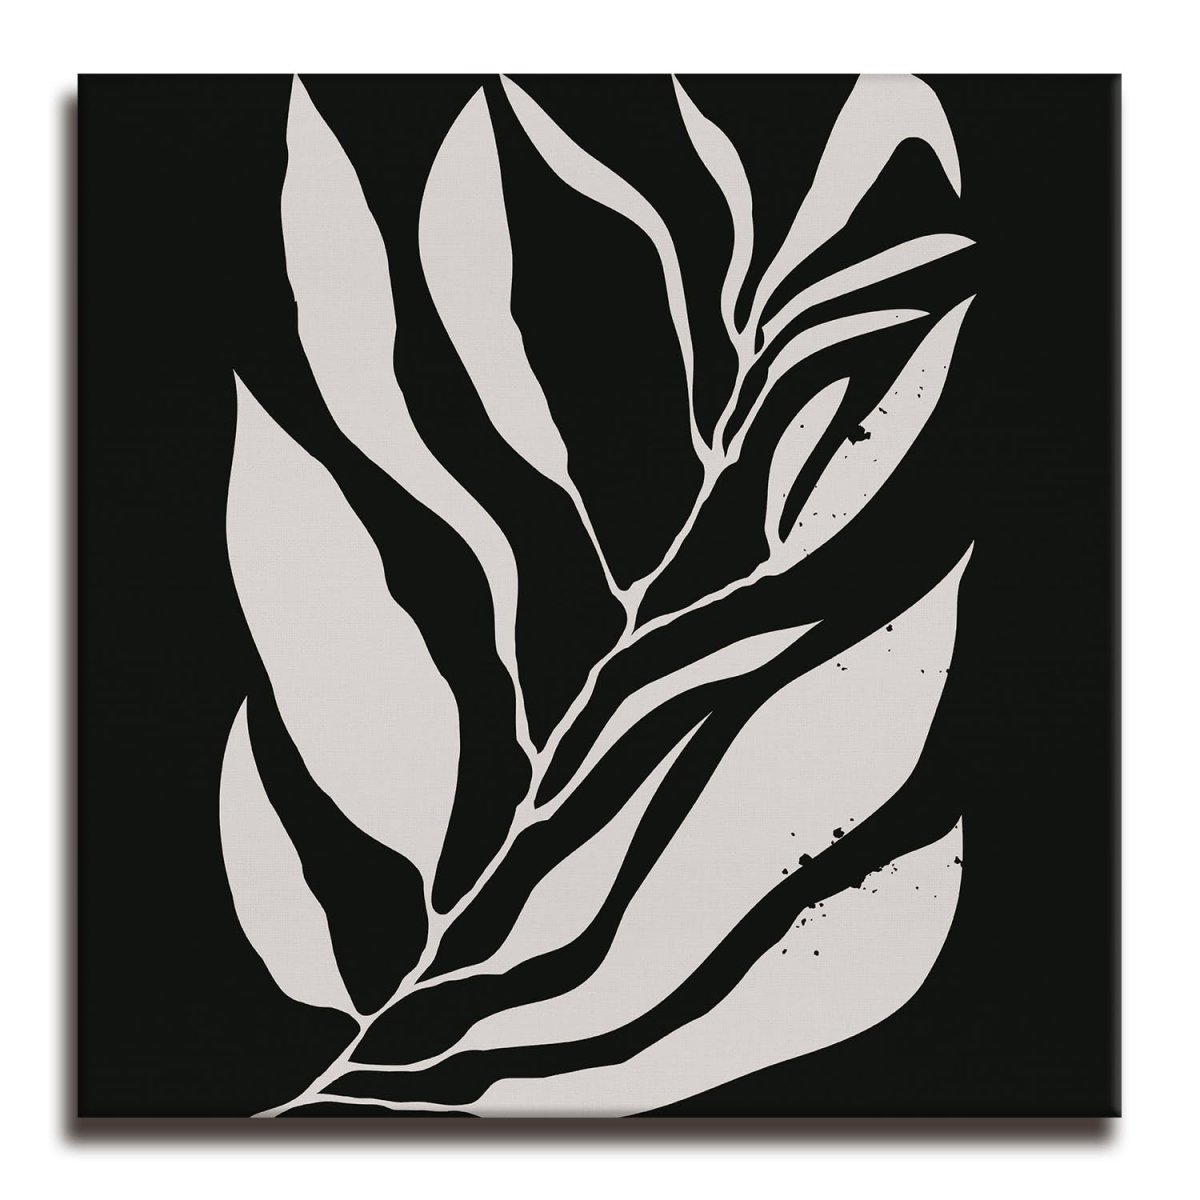 The Veined Tapestry Boho Leaves Canvas Wall Painting (36 x 36 Inches)